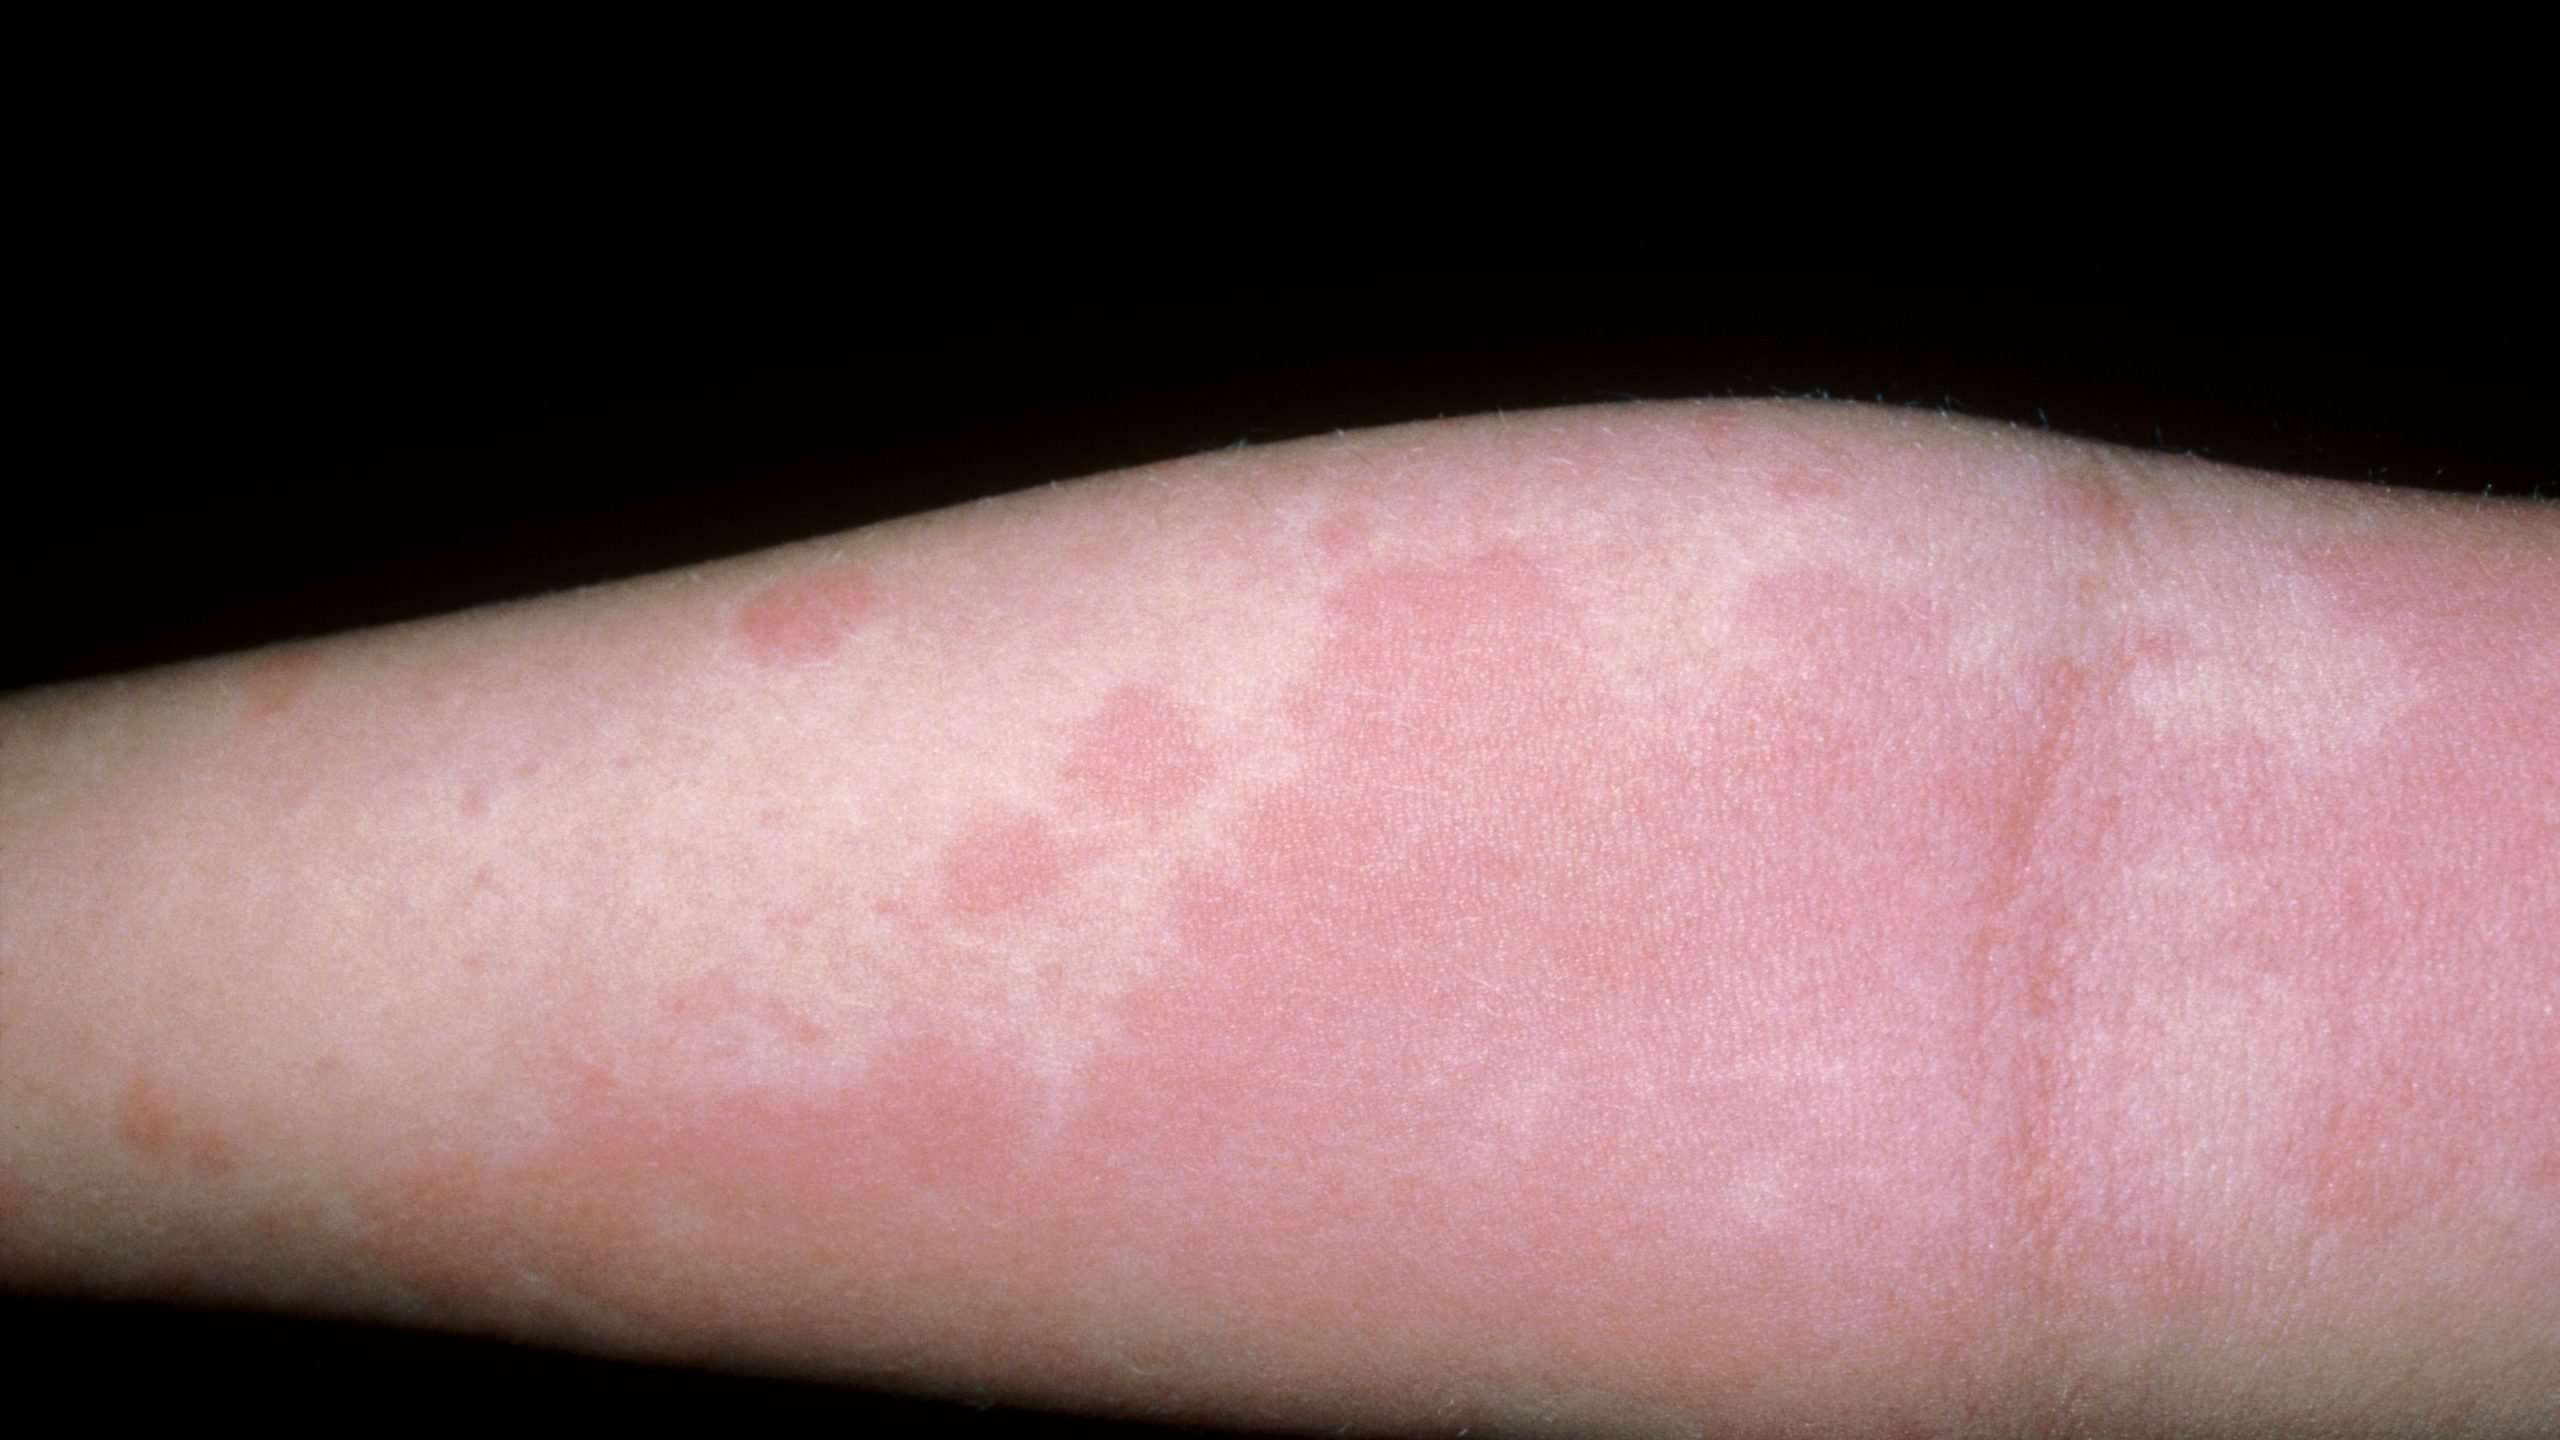 Anaphylaxis Rash : Urticaria Hives Allergy Anaphylaxis ...